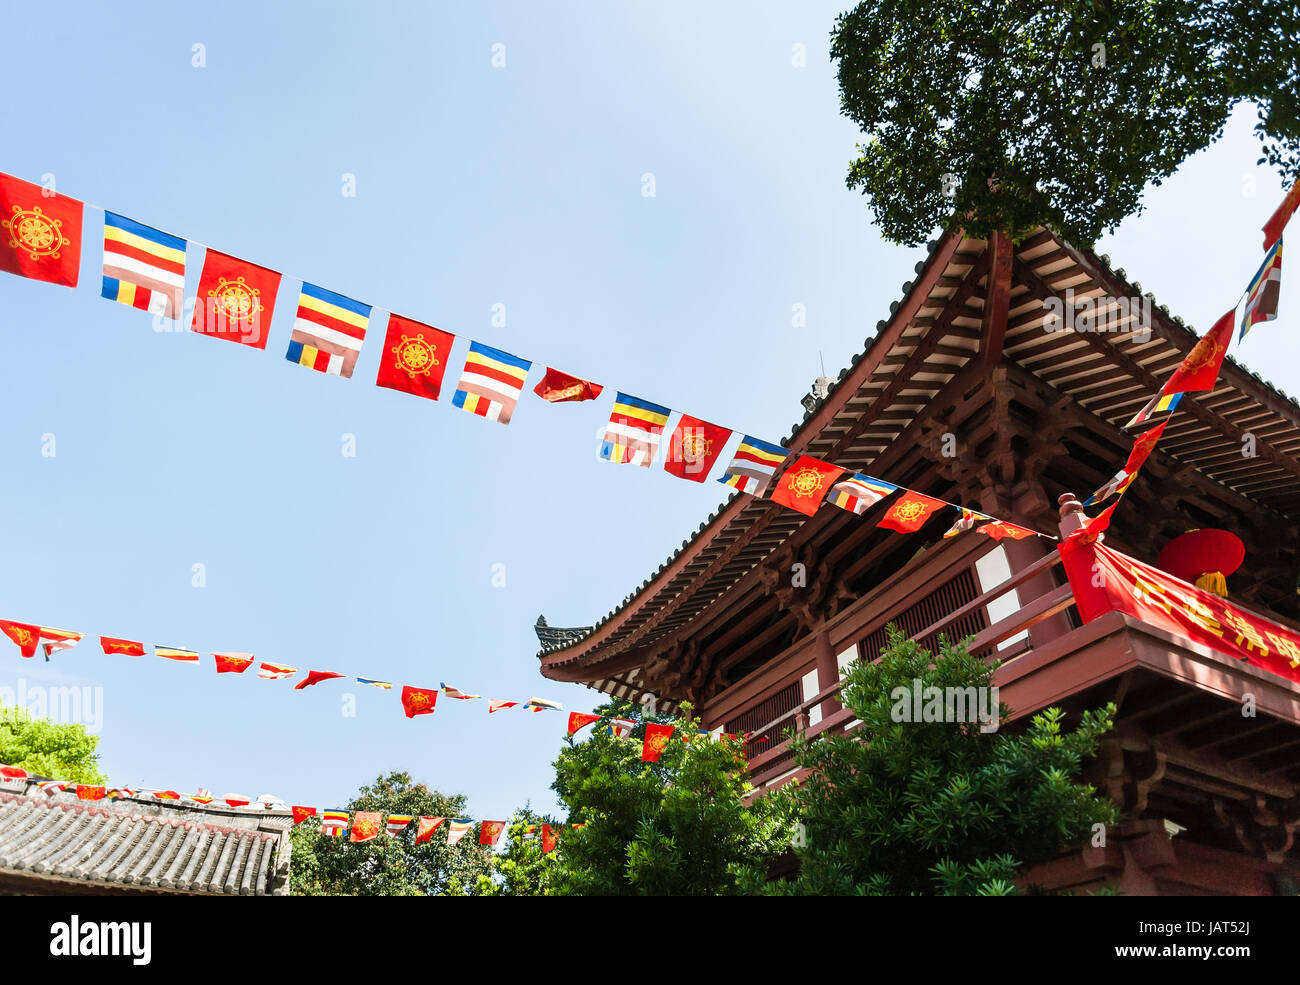 GUANGZHOU, CHINA - APRIL 1, 2017: flag garlands in Guangxiao Temple (Bright Obedience, Bright Filial Piety Temple). This is is one of the oldest Buddh Stock Photo